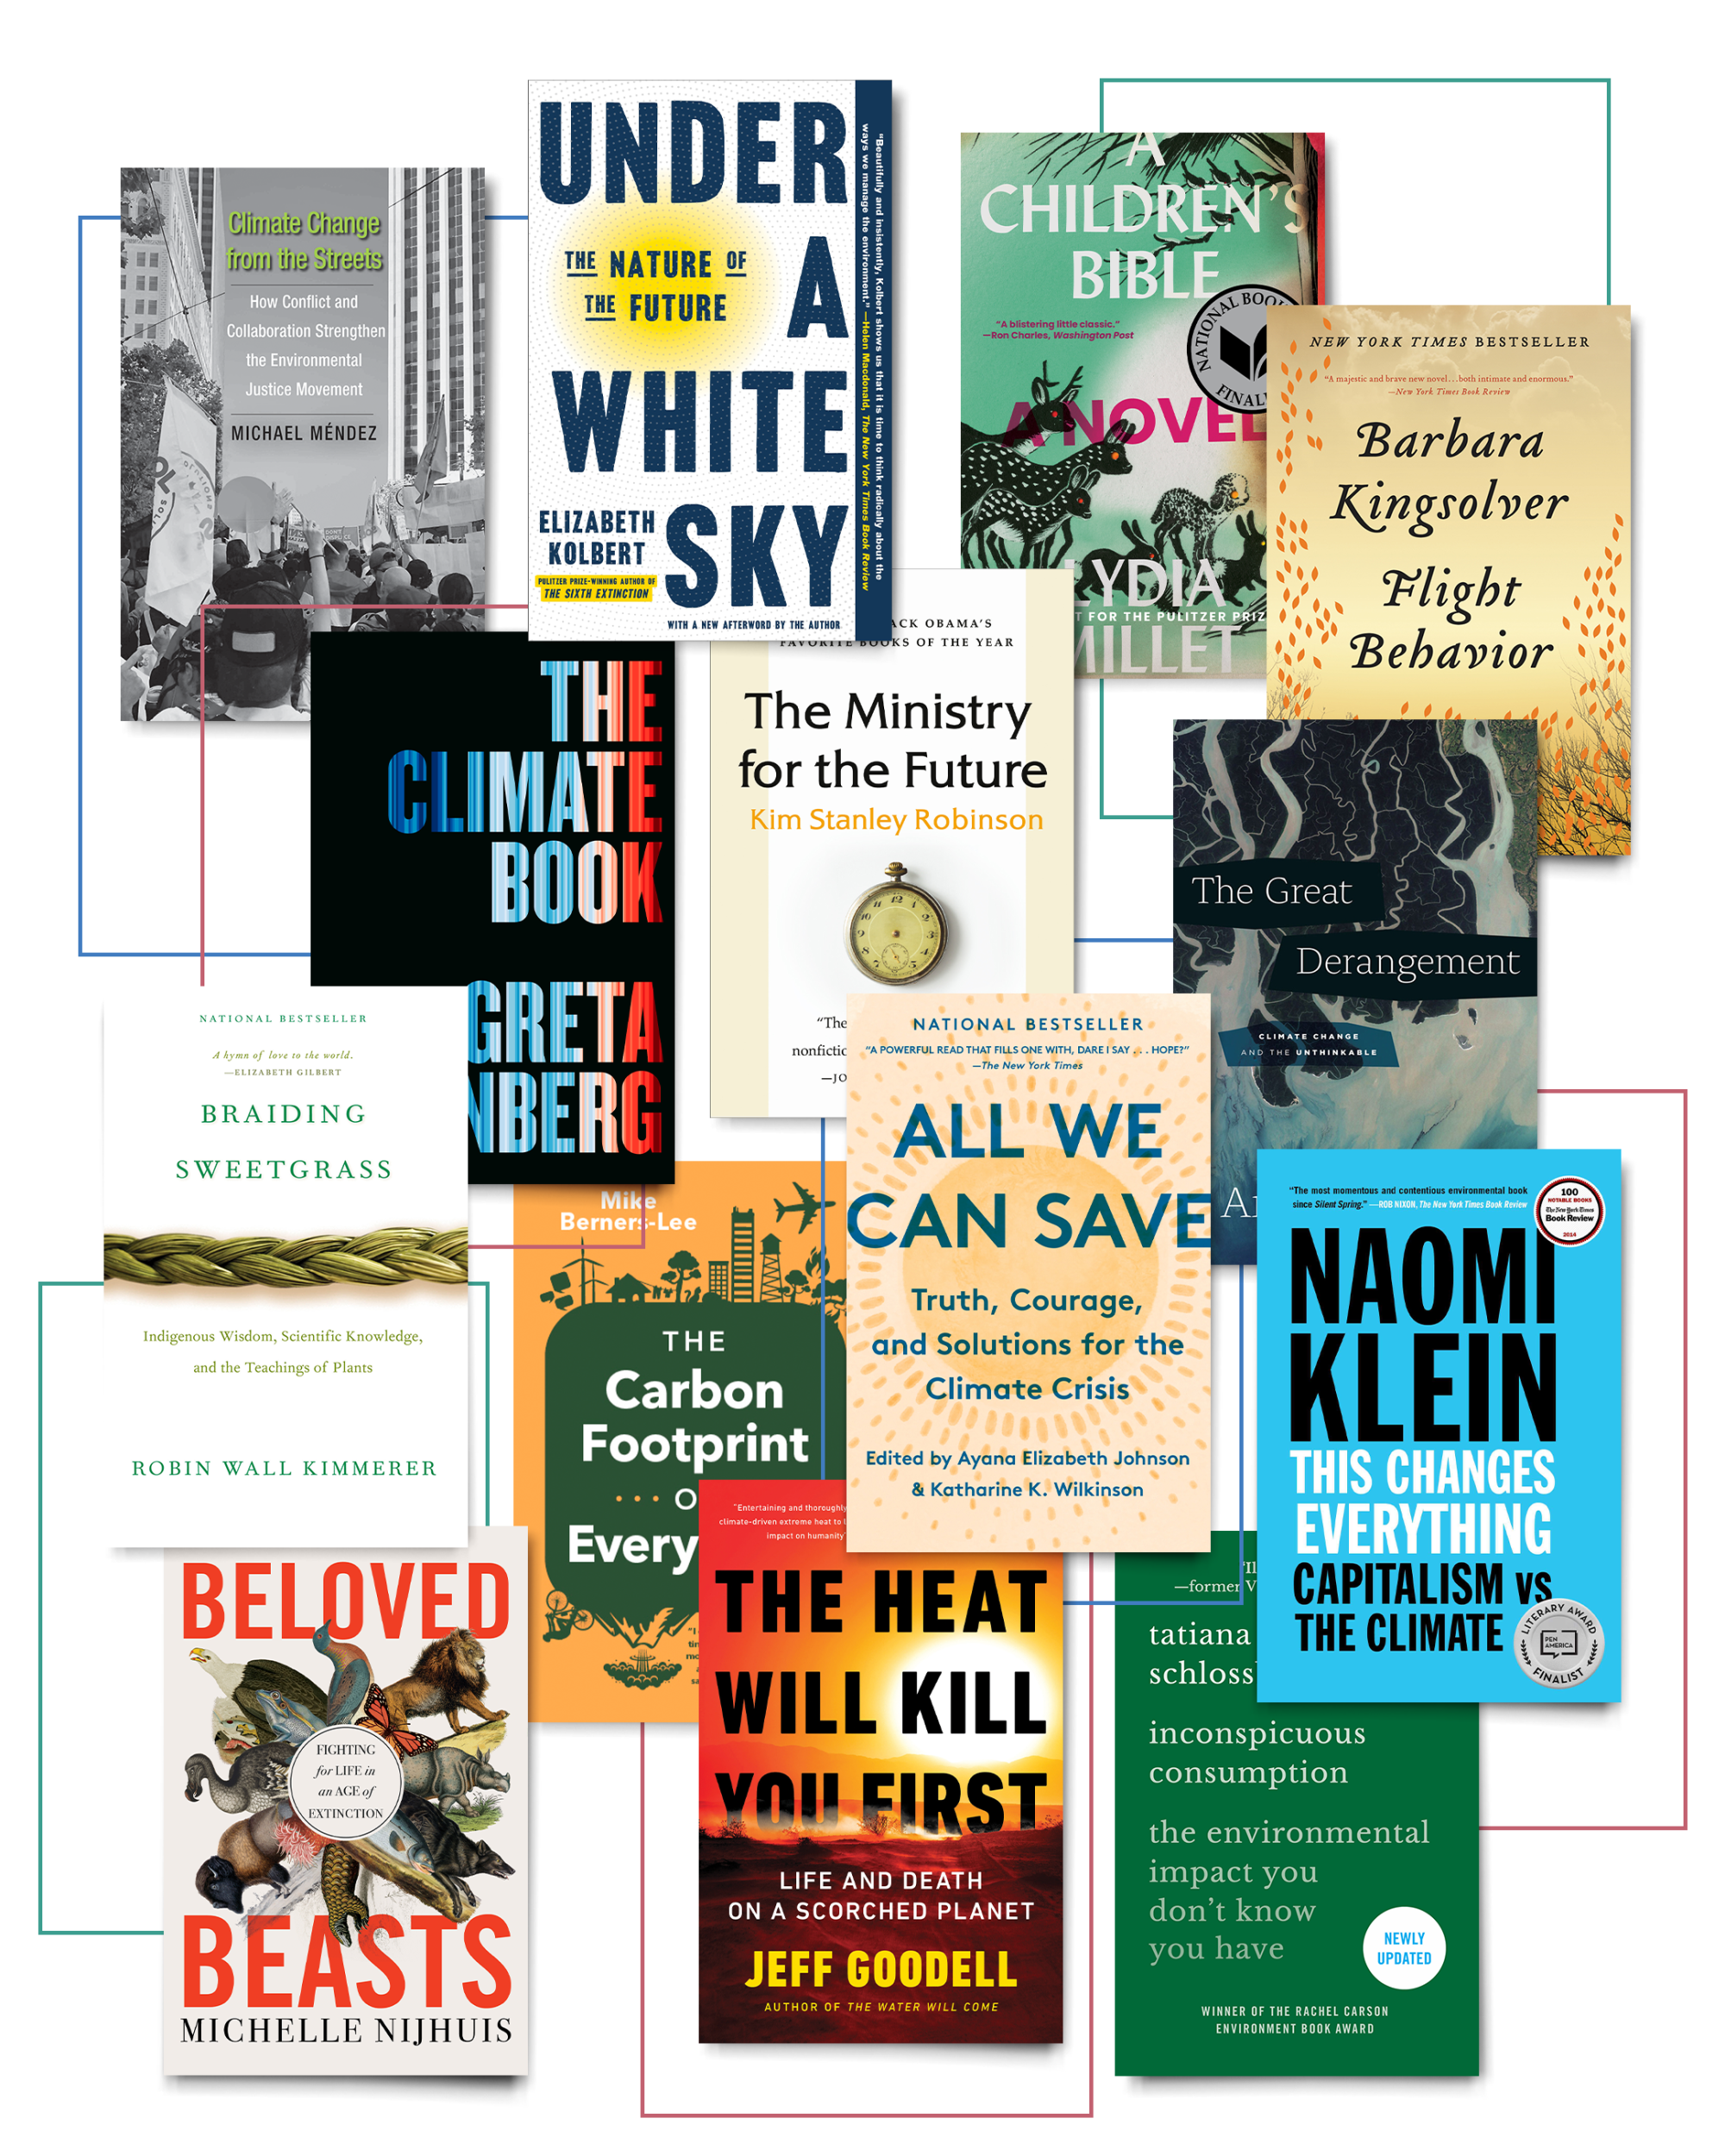 A collage of book covers featuring books on the topic of climate change